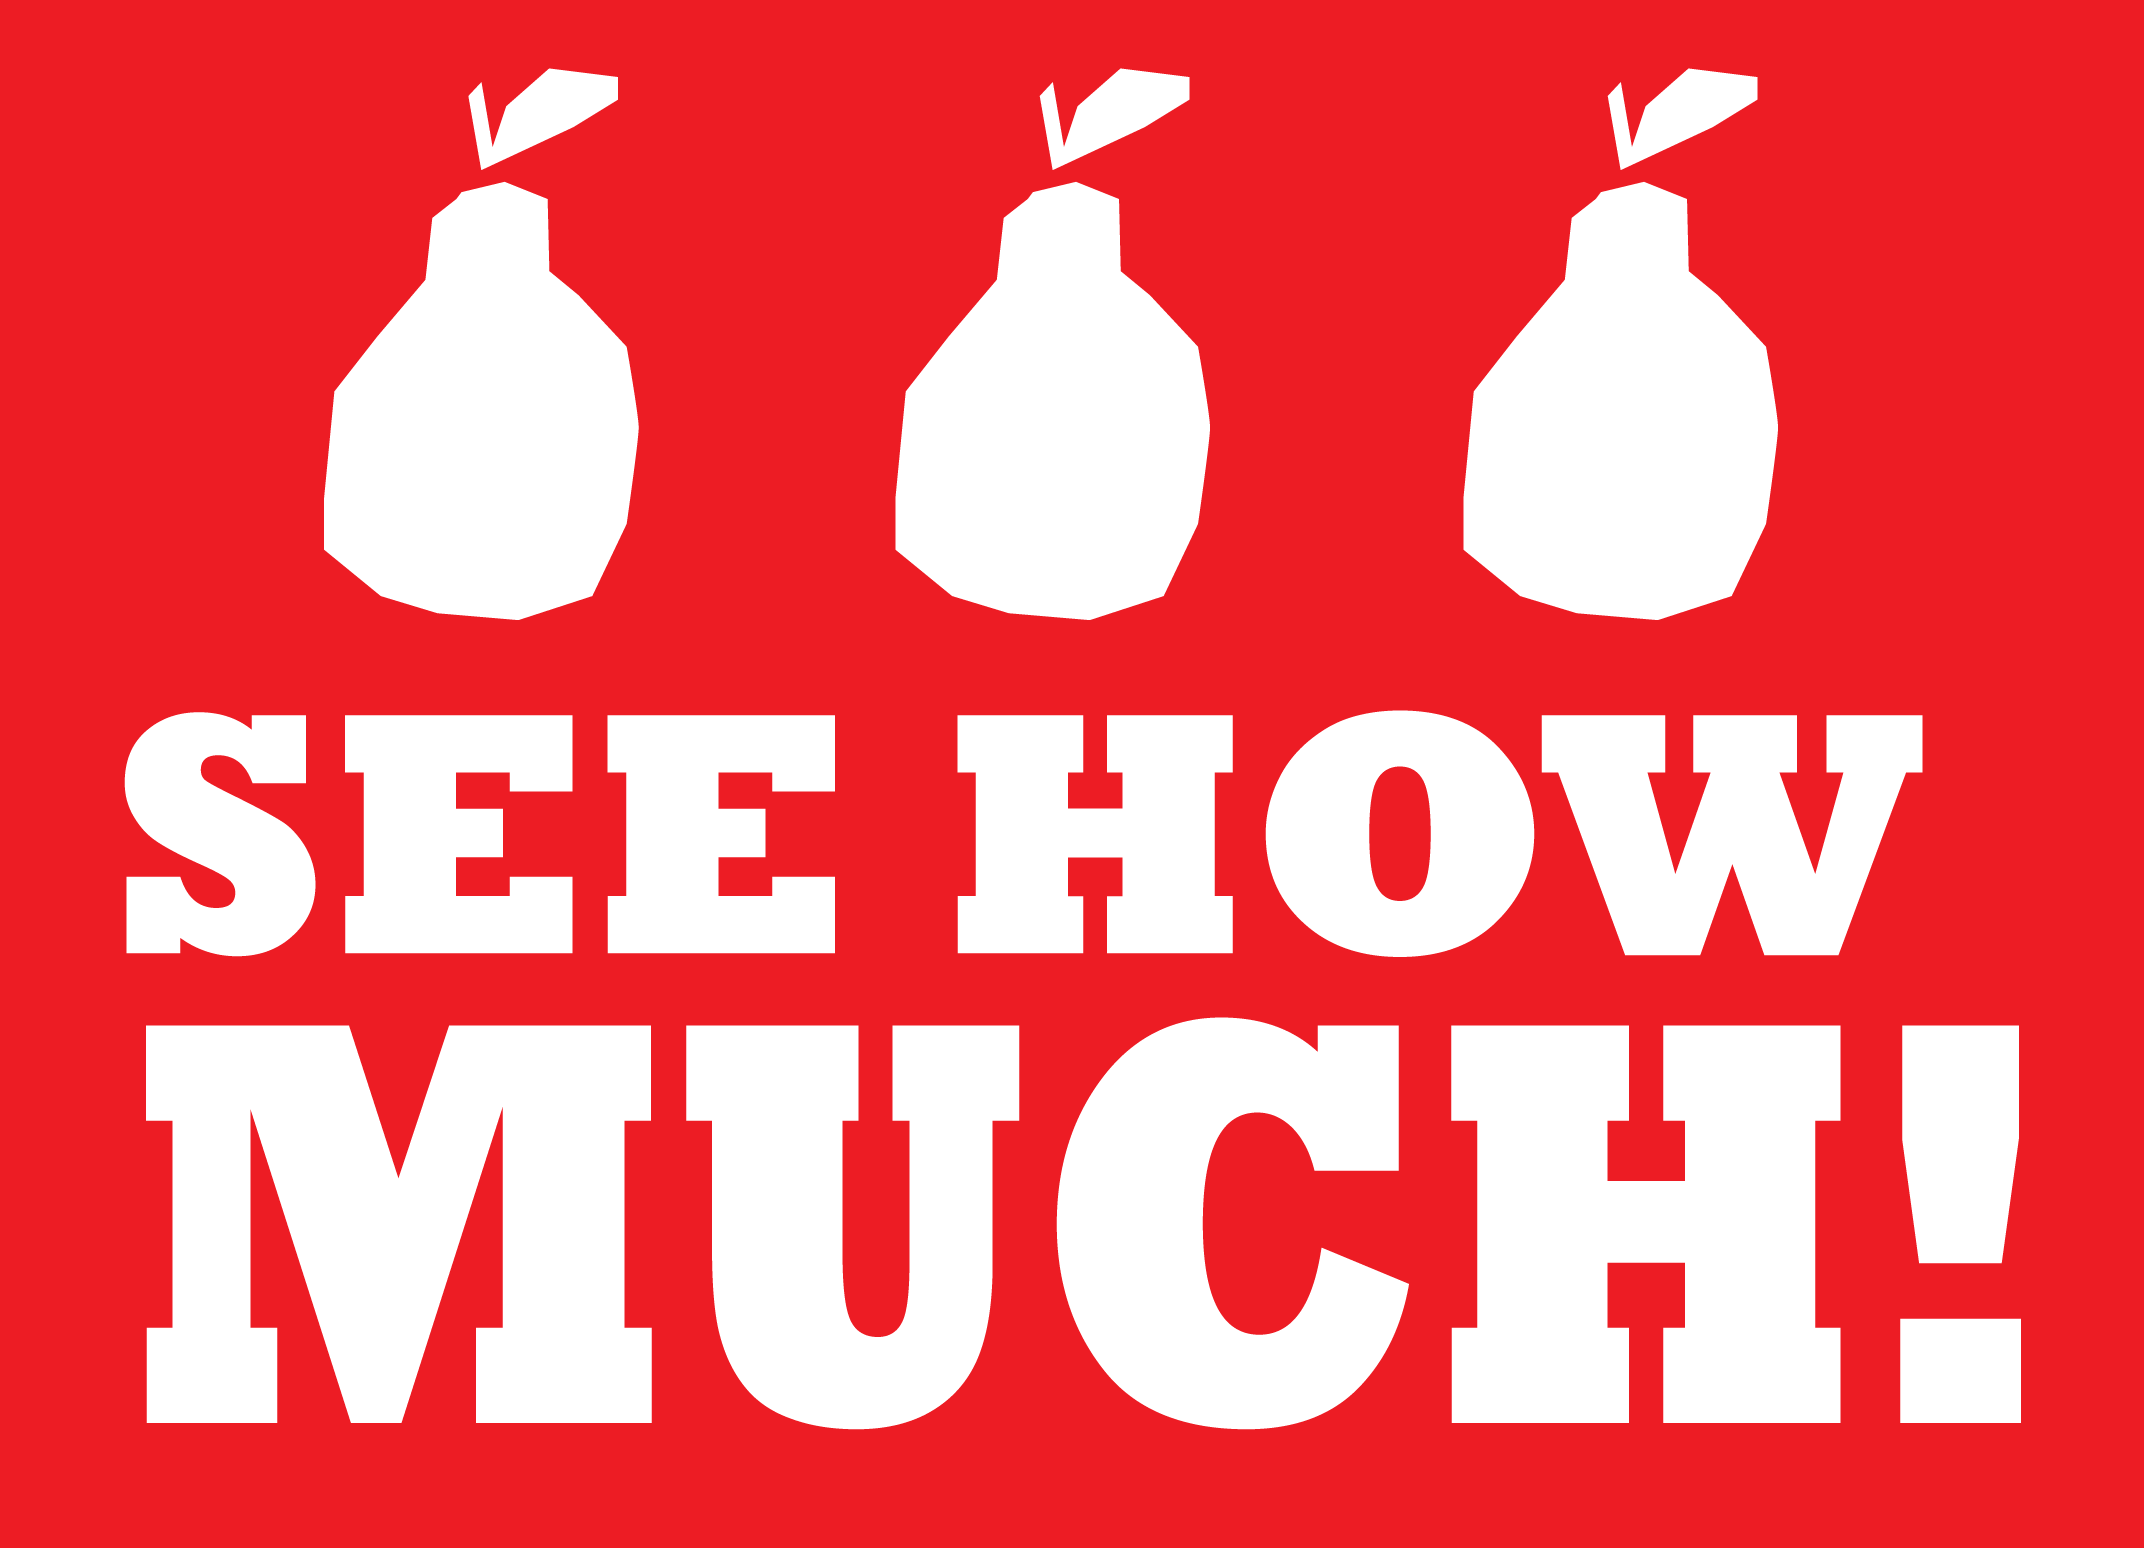 See How Much! logo is white on red with three white pears